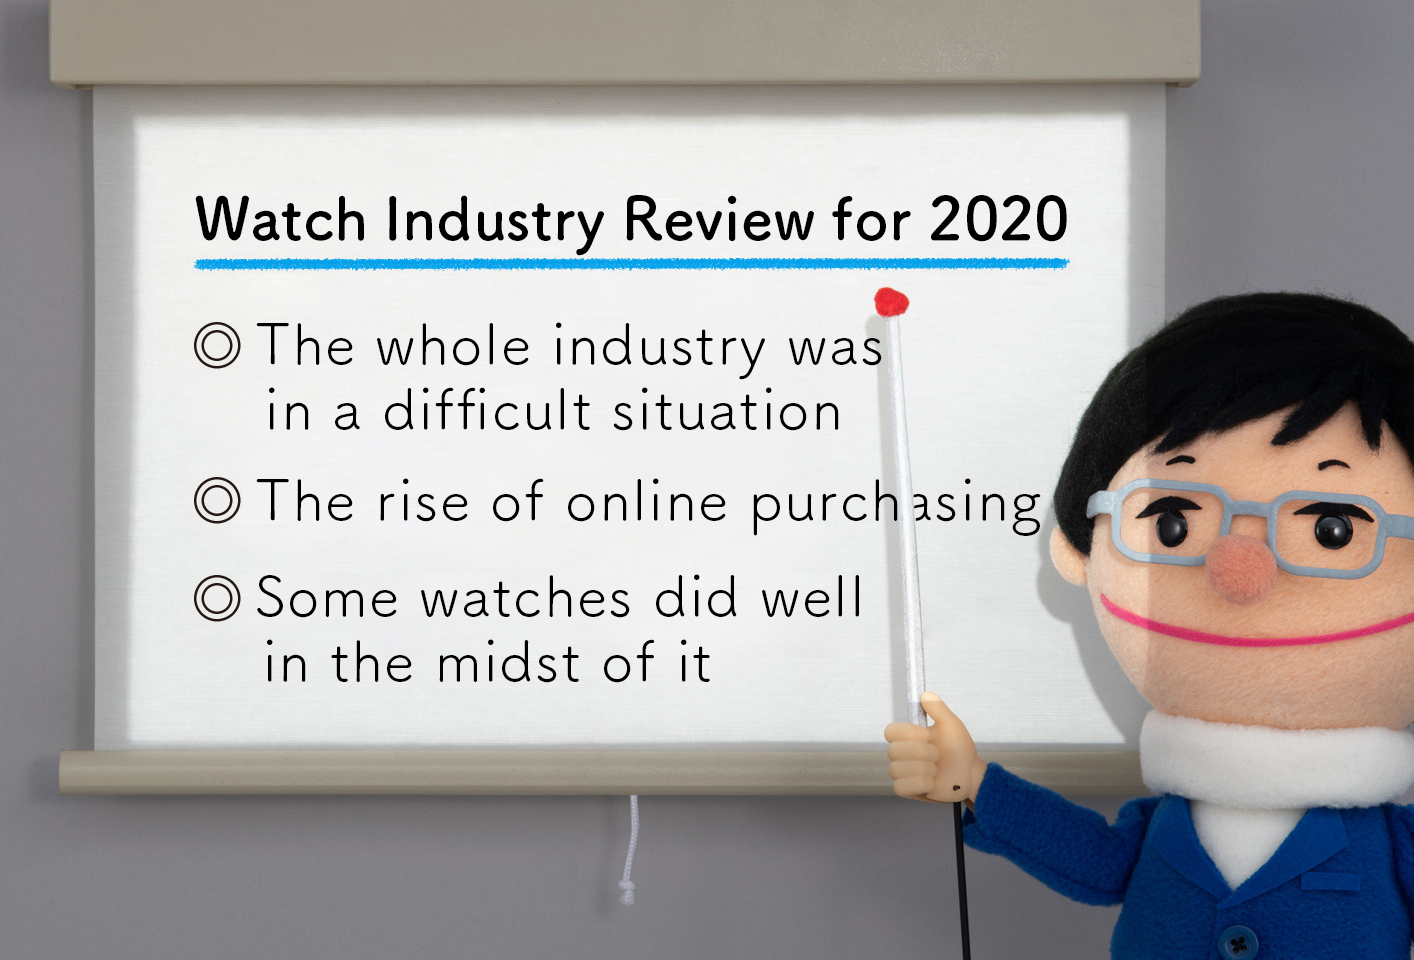 Watch Industry Review for 2020 / The whole industry was in a difficult situation / The rise of online purchasing / Some watches did well in the midst of it